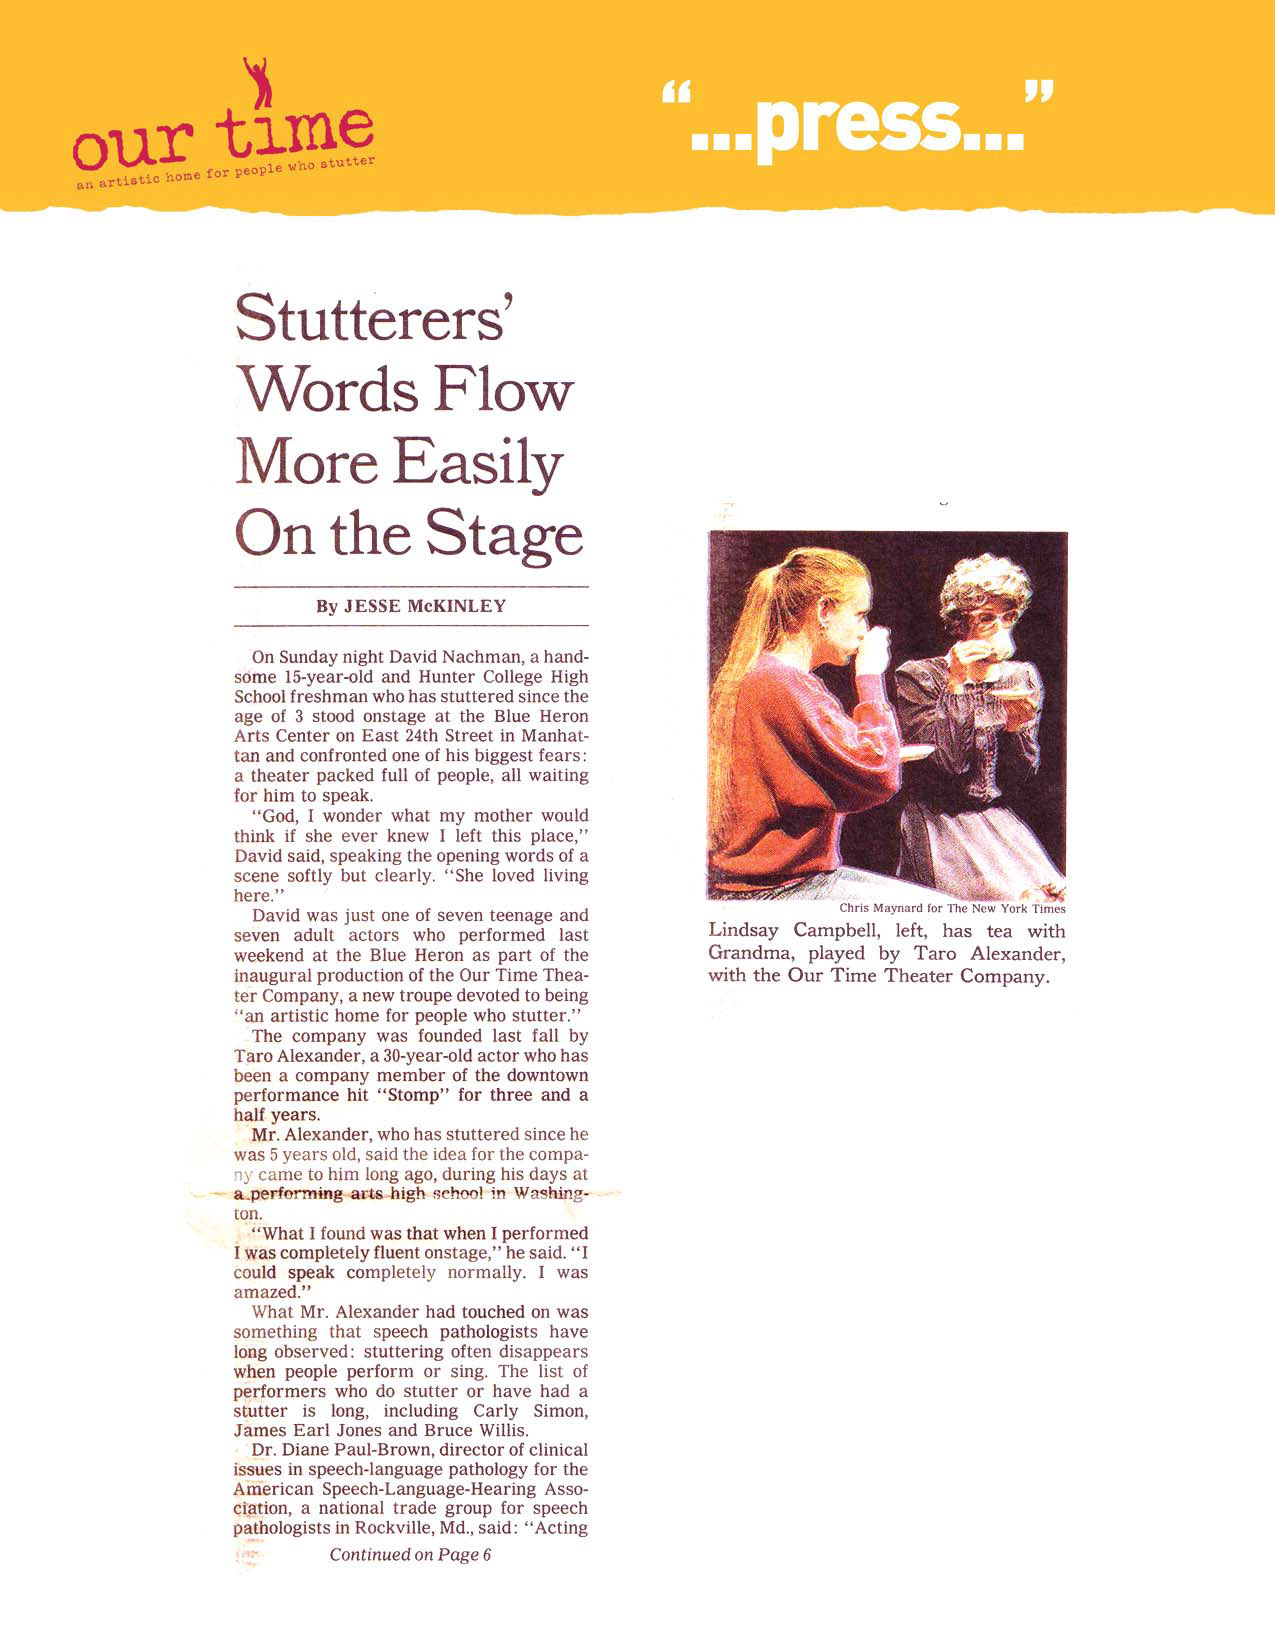 Stutterers’ Words Flow More Easily On the Stage